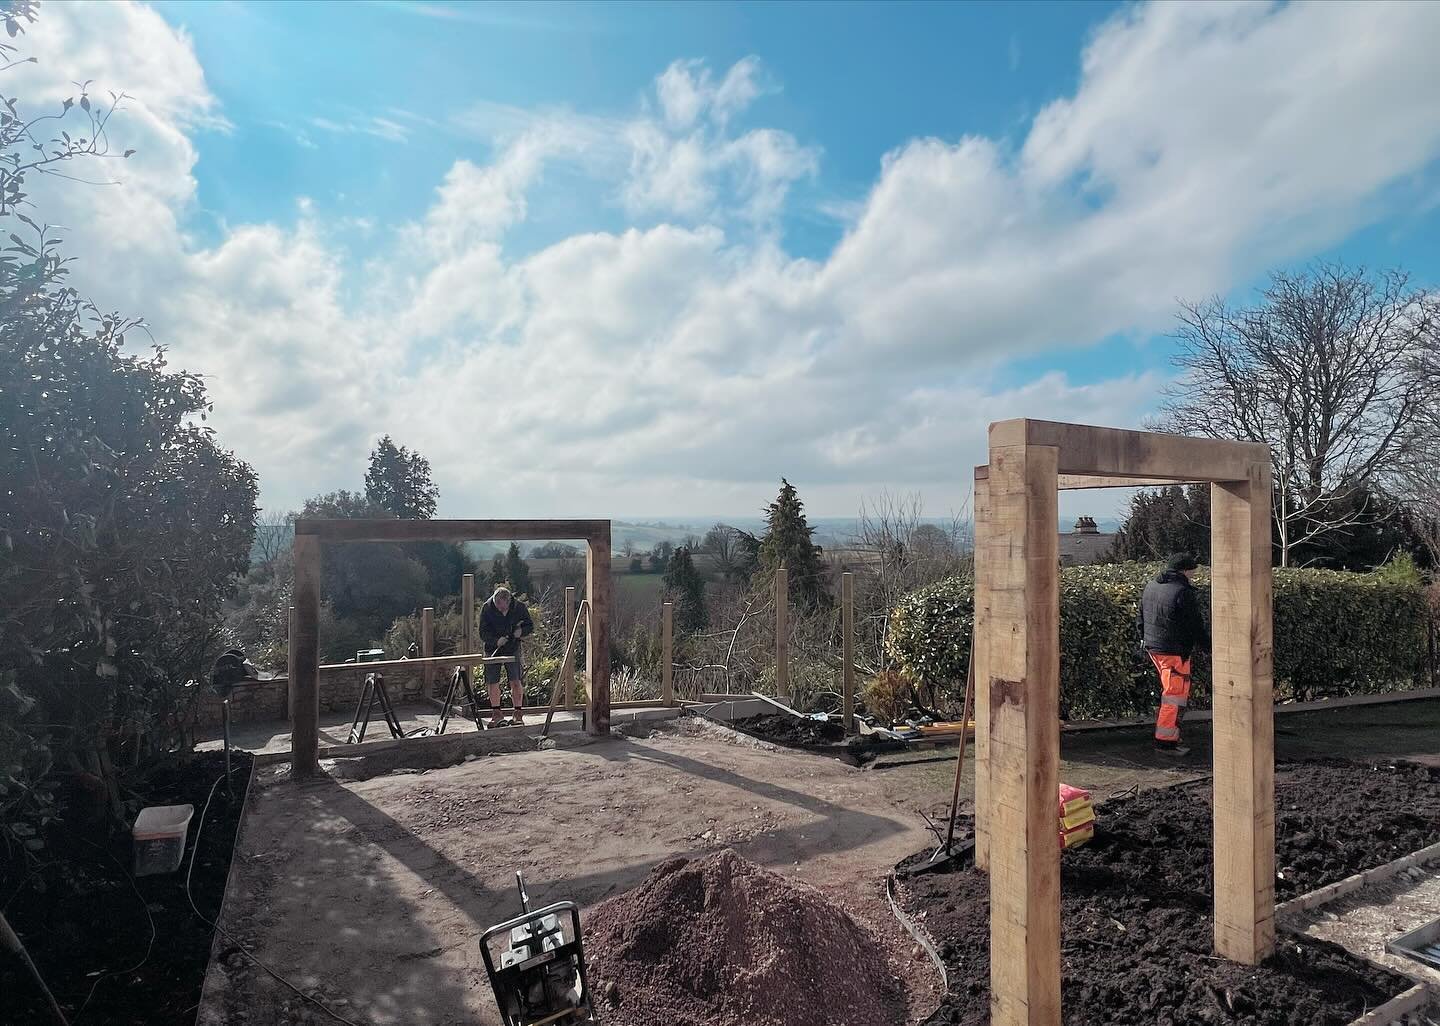 Carpenter has been busy at our Timsbury Garden! Full transformation of this unused corner, Oak frame up and capturing the views. Great progress through snow, rain and sunshine